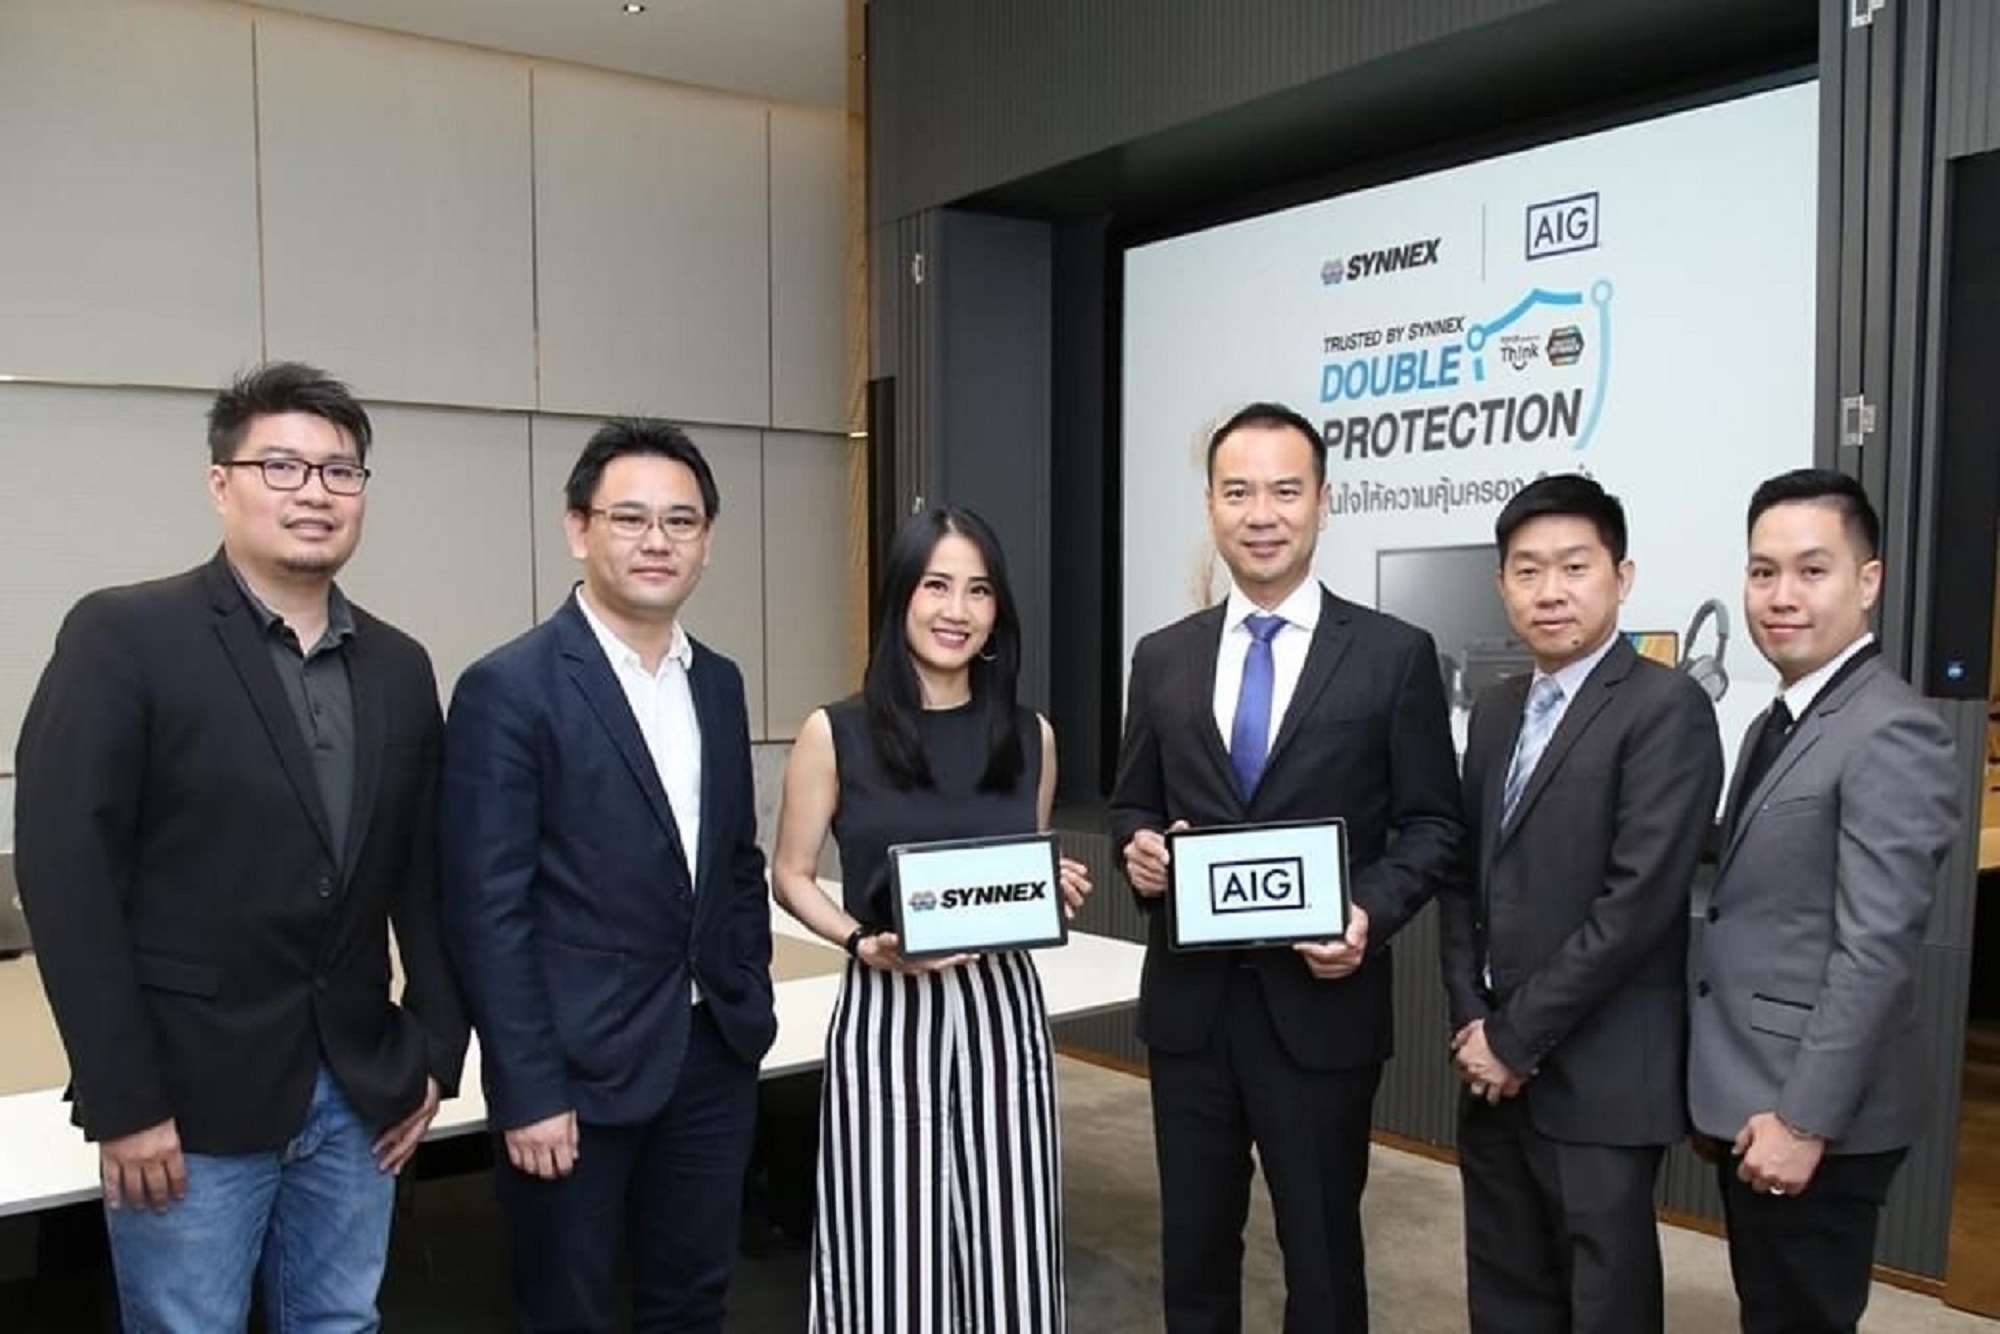 AIG Thailand and Synnex join forces to launch the Synnex Double Protection Campaign